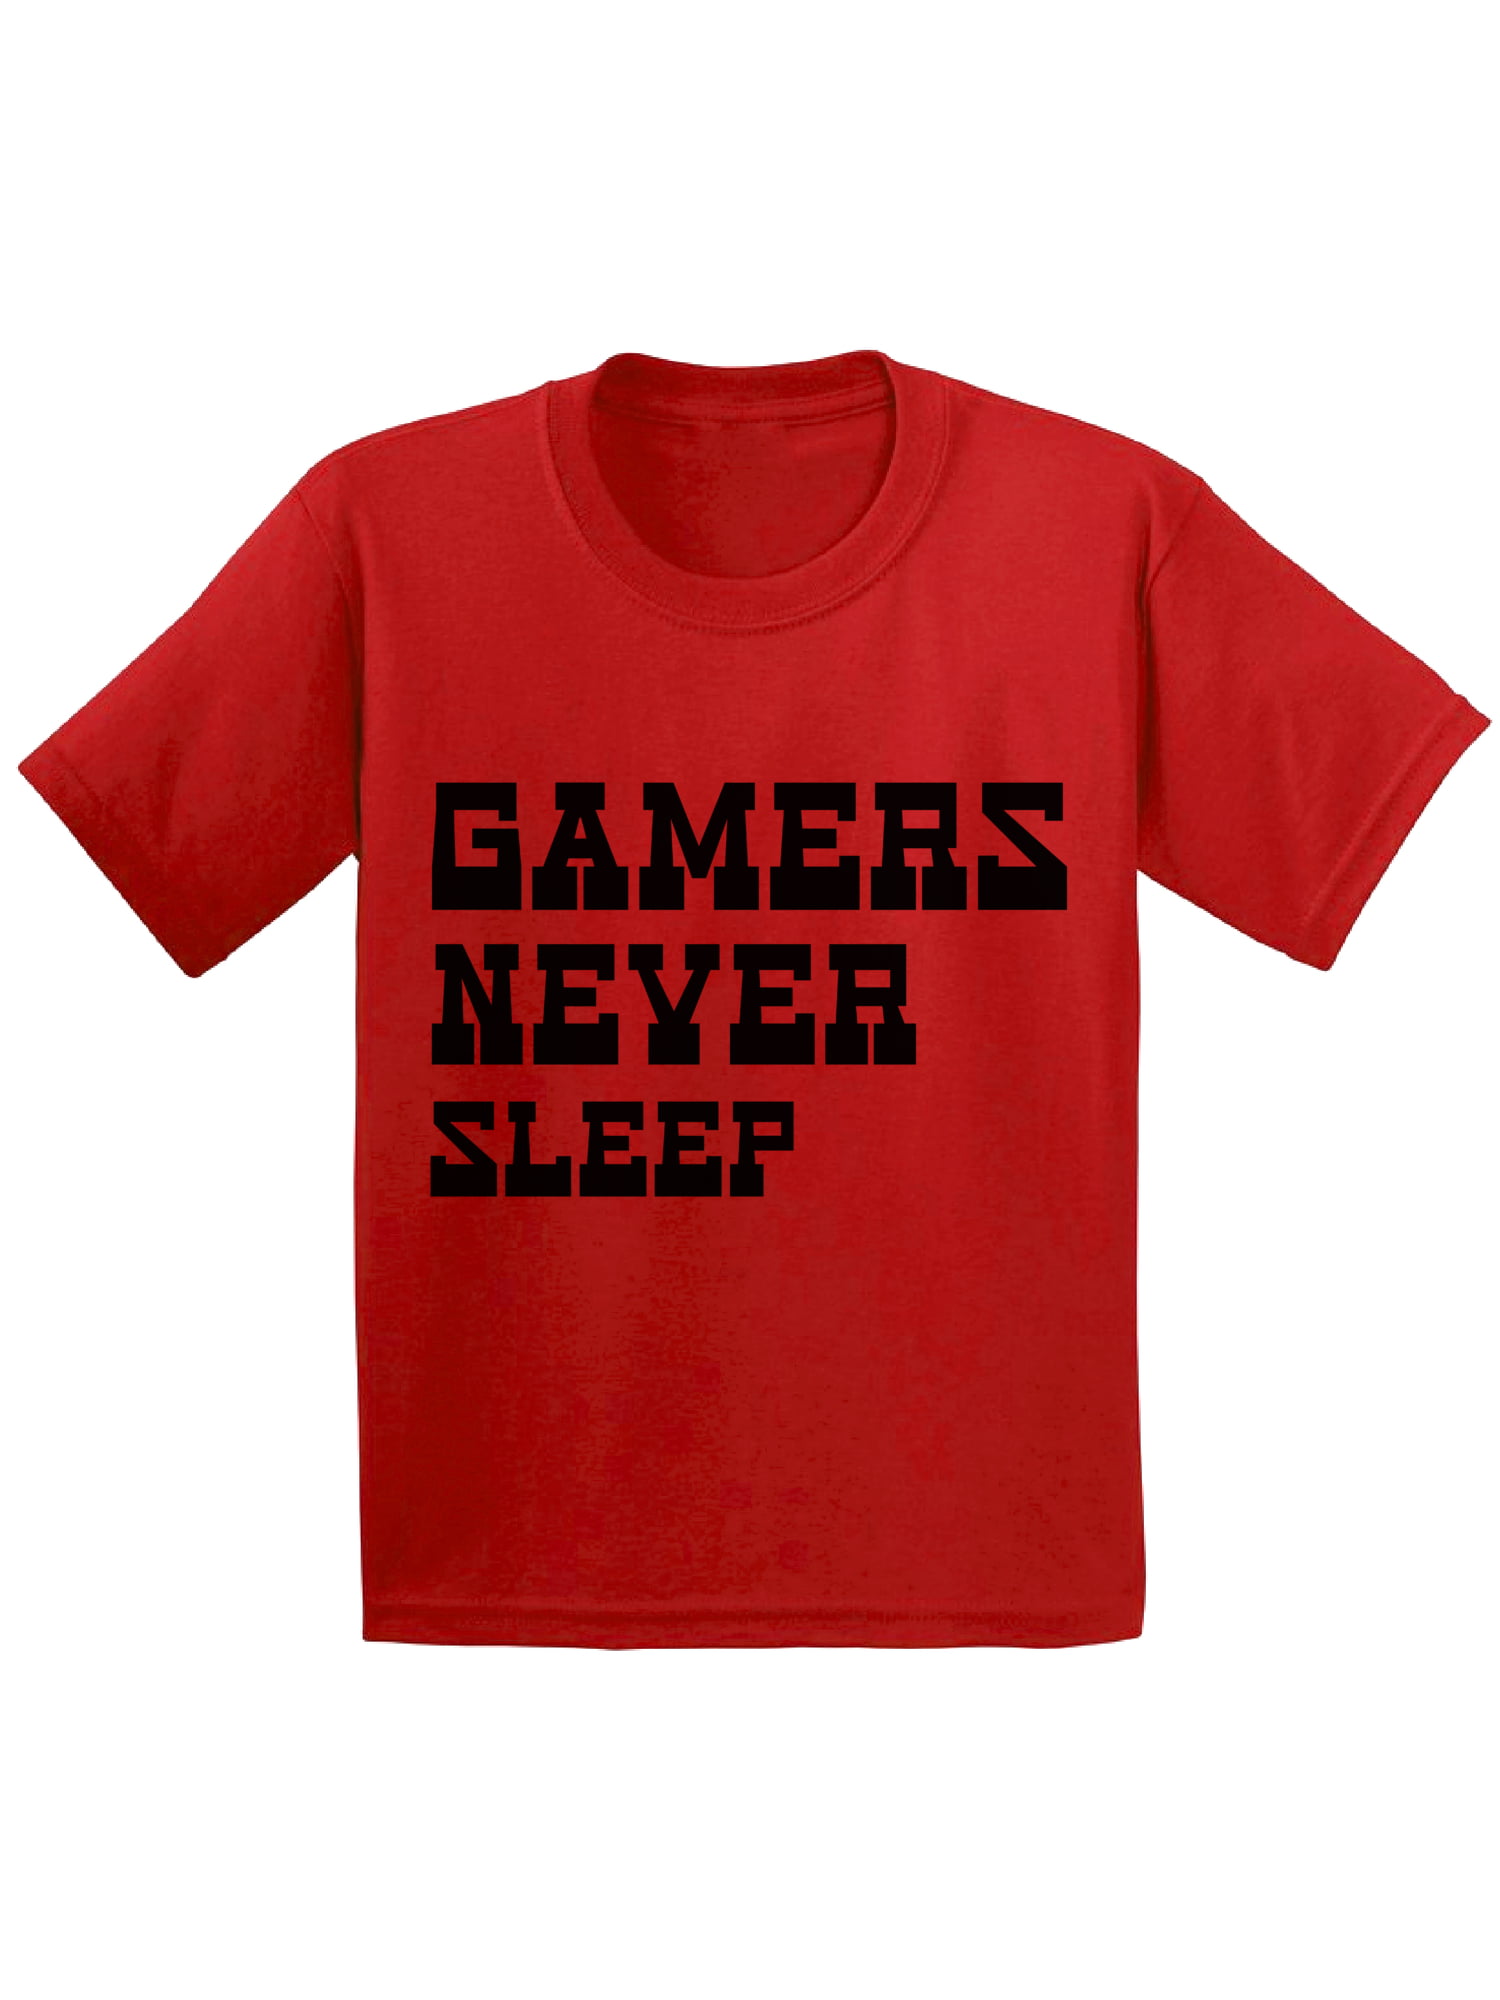 Gamer Gifts Video Game Merchandise Gaming Funny Youth Kids Girl Boy T-Shirt 